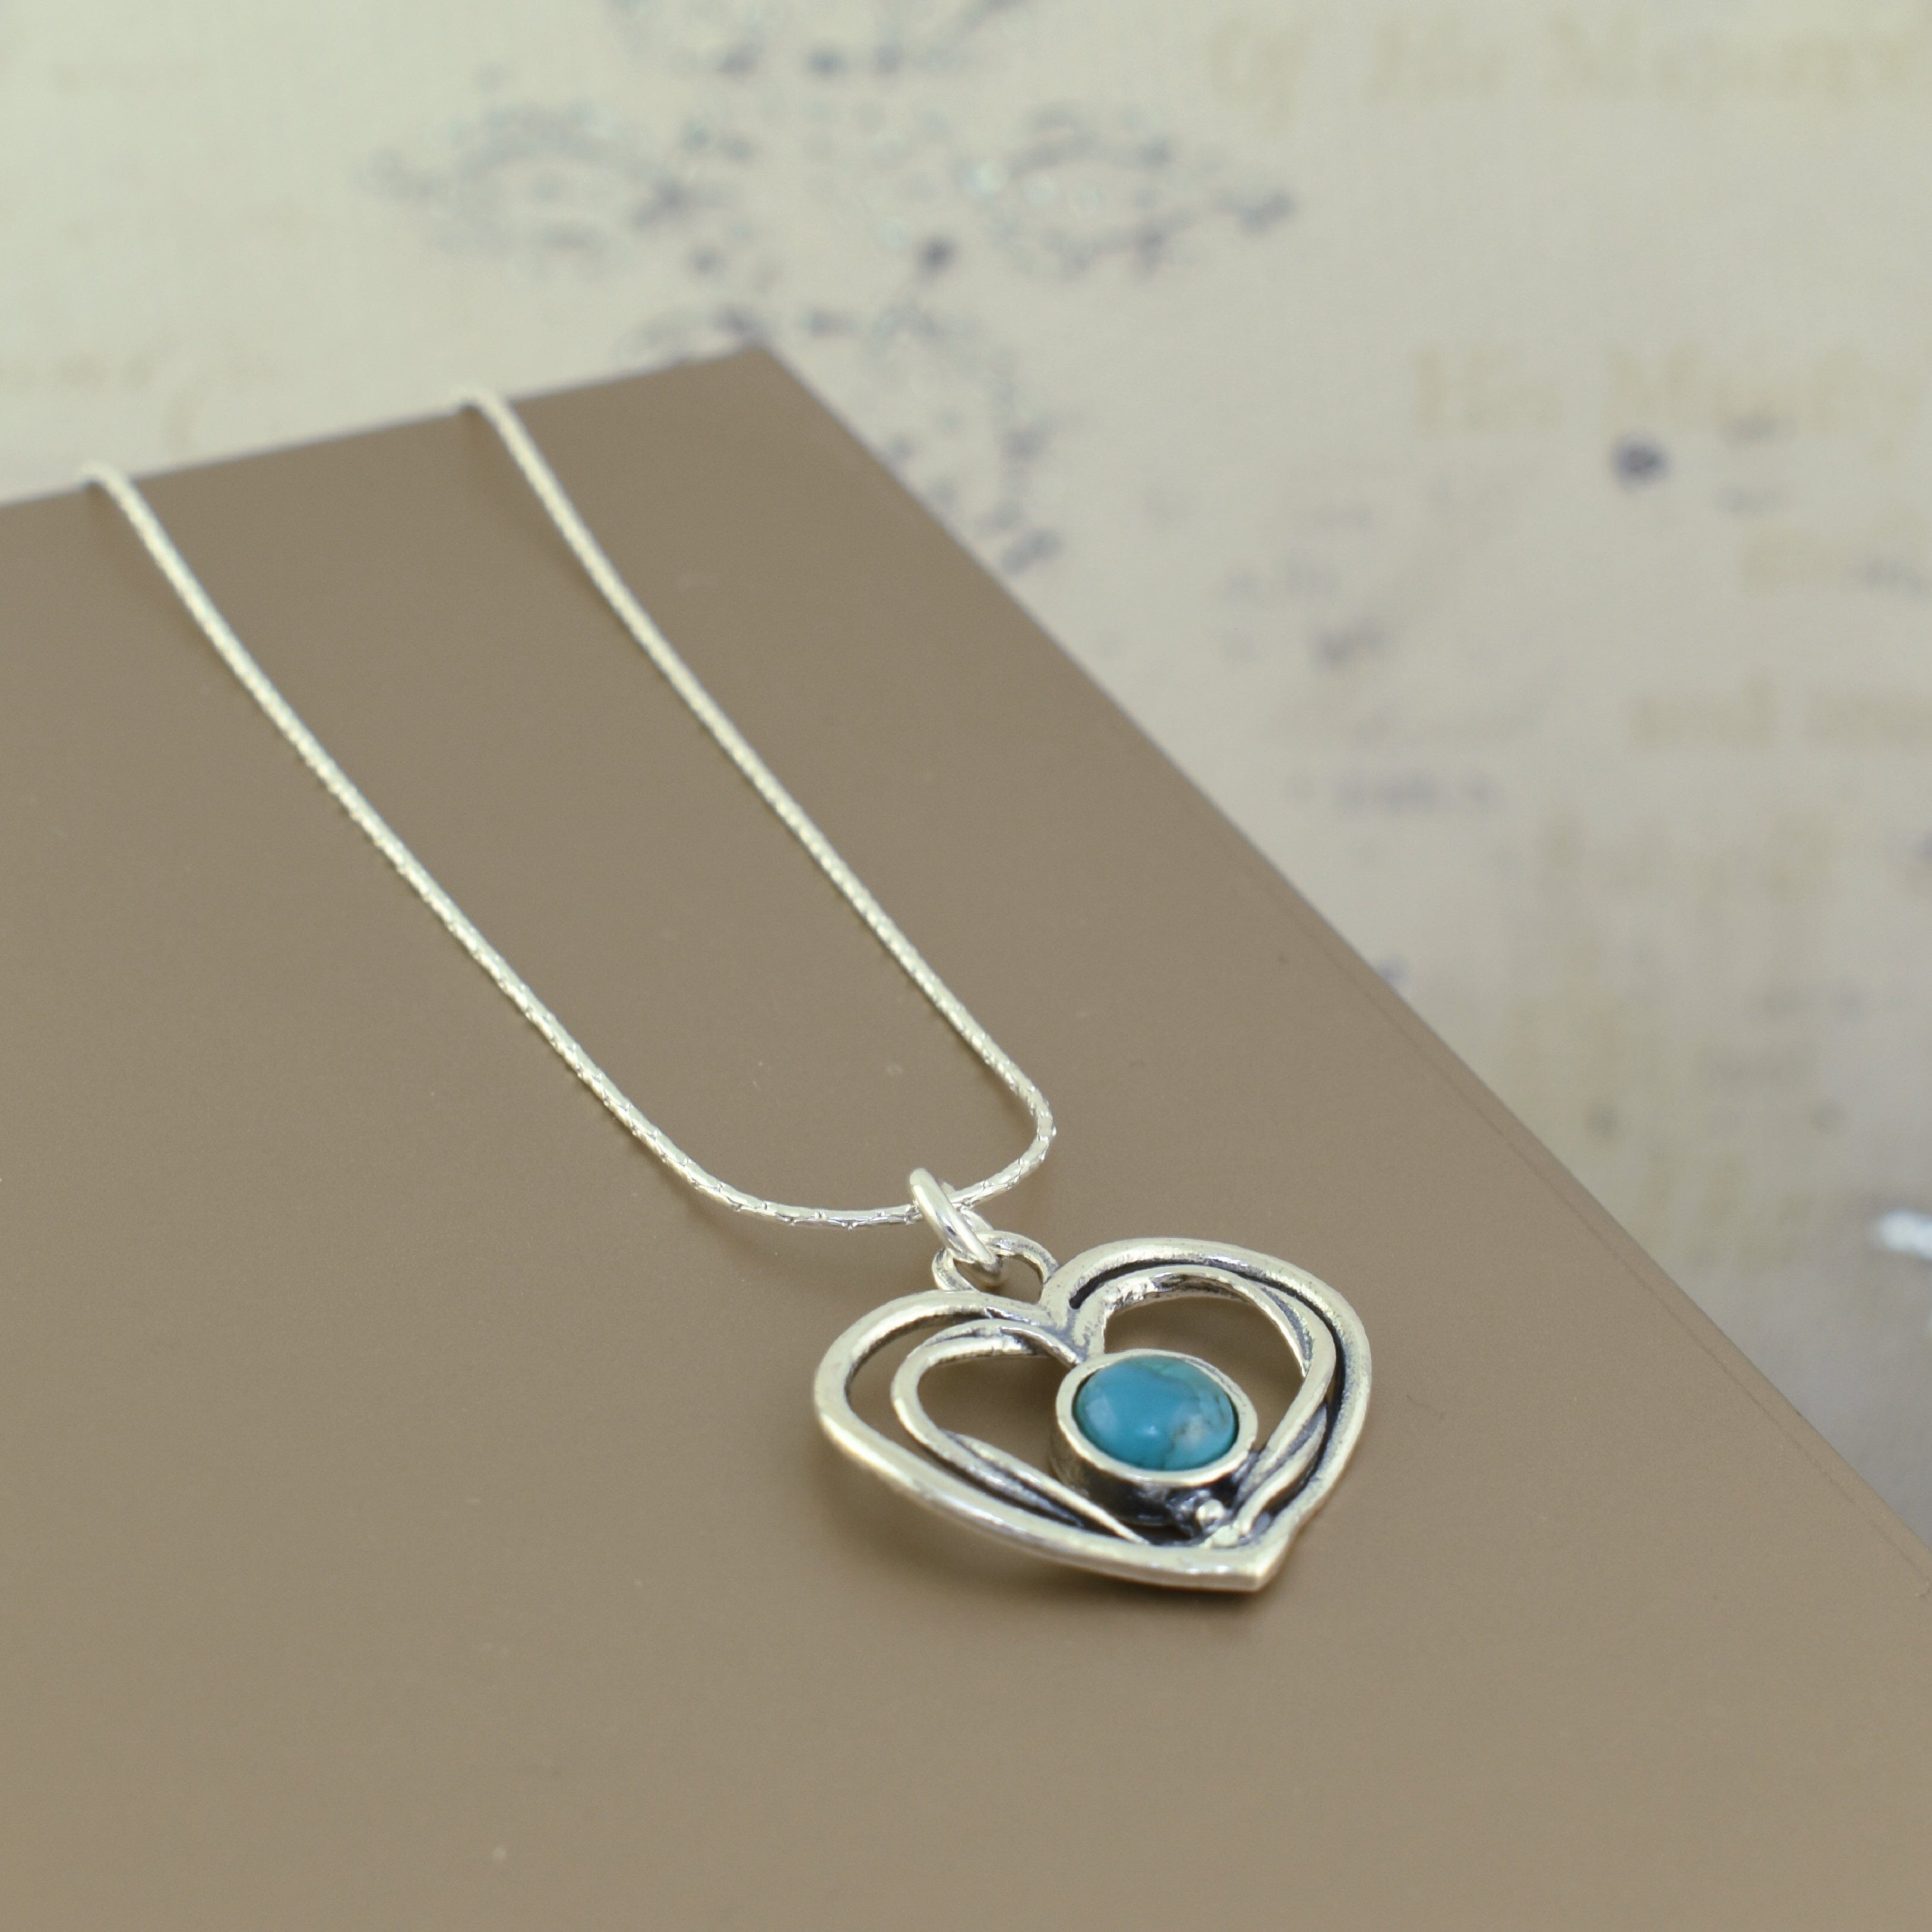 .925 sterling silver heart necklace with turquoise stone